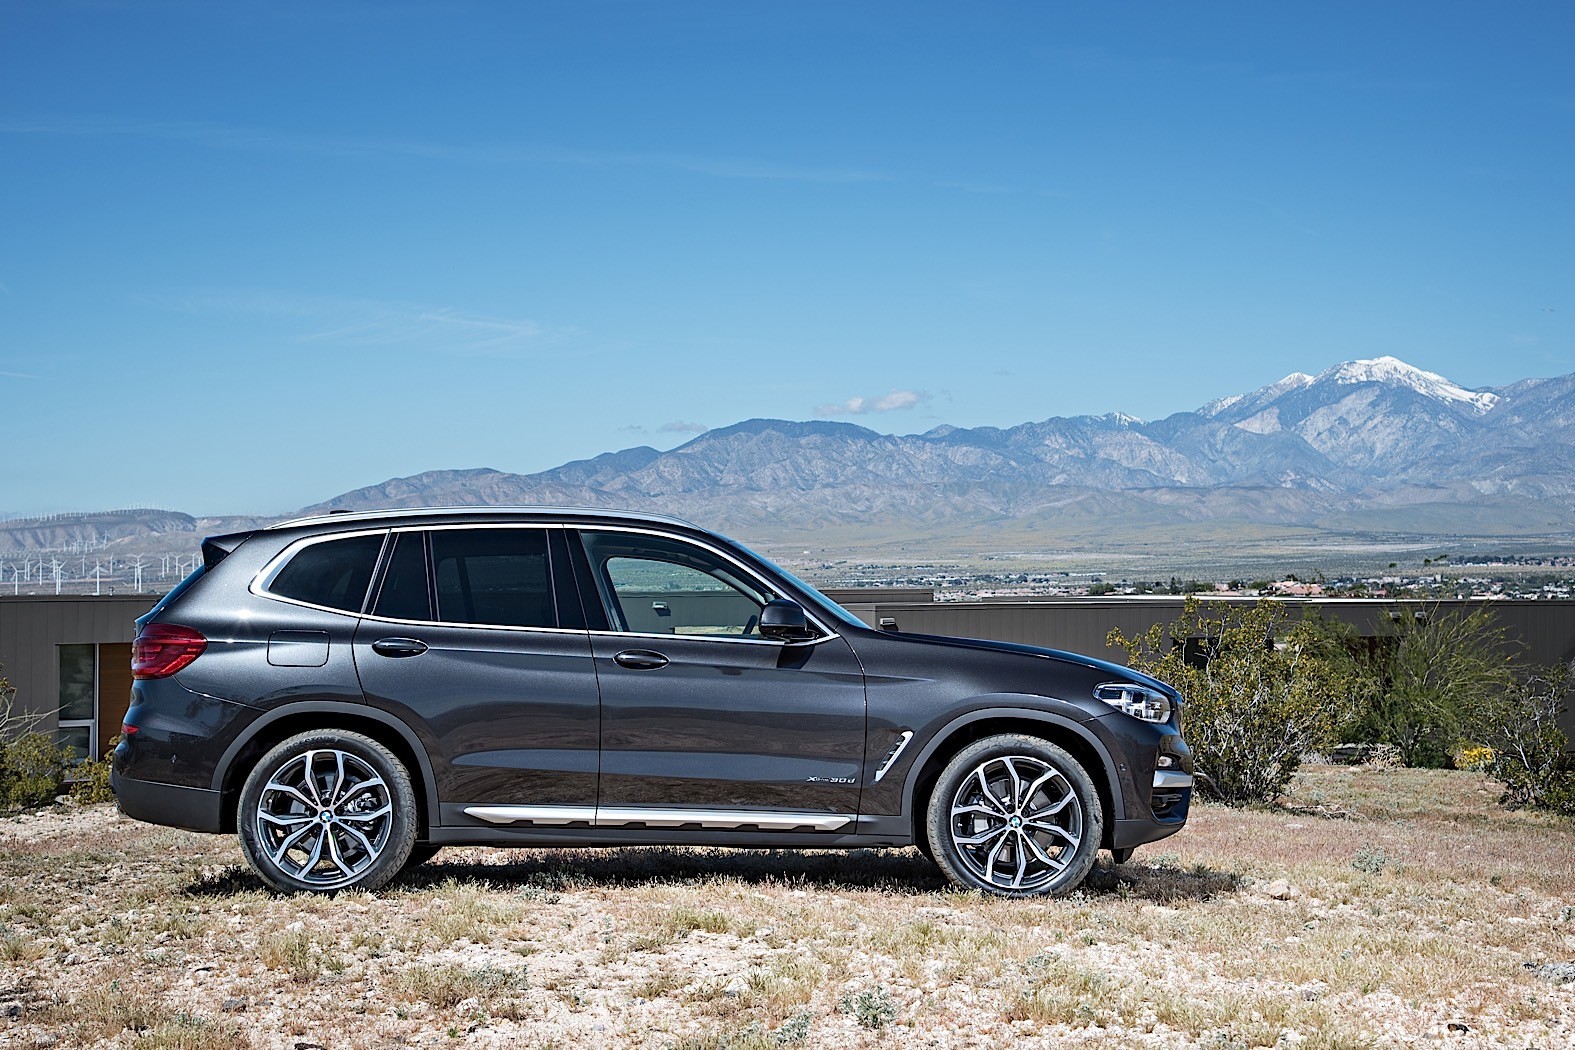 2018 BMW X3 (G01) Priced In The U.S. From 42,450 For The